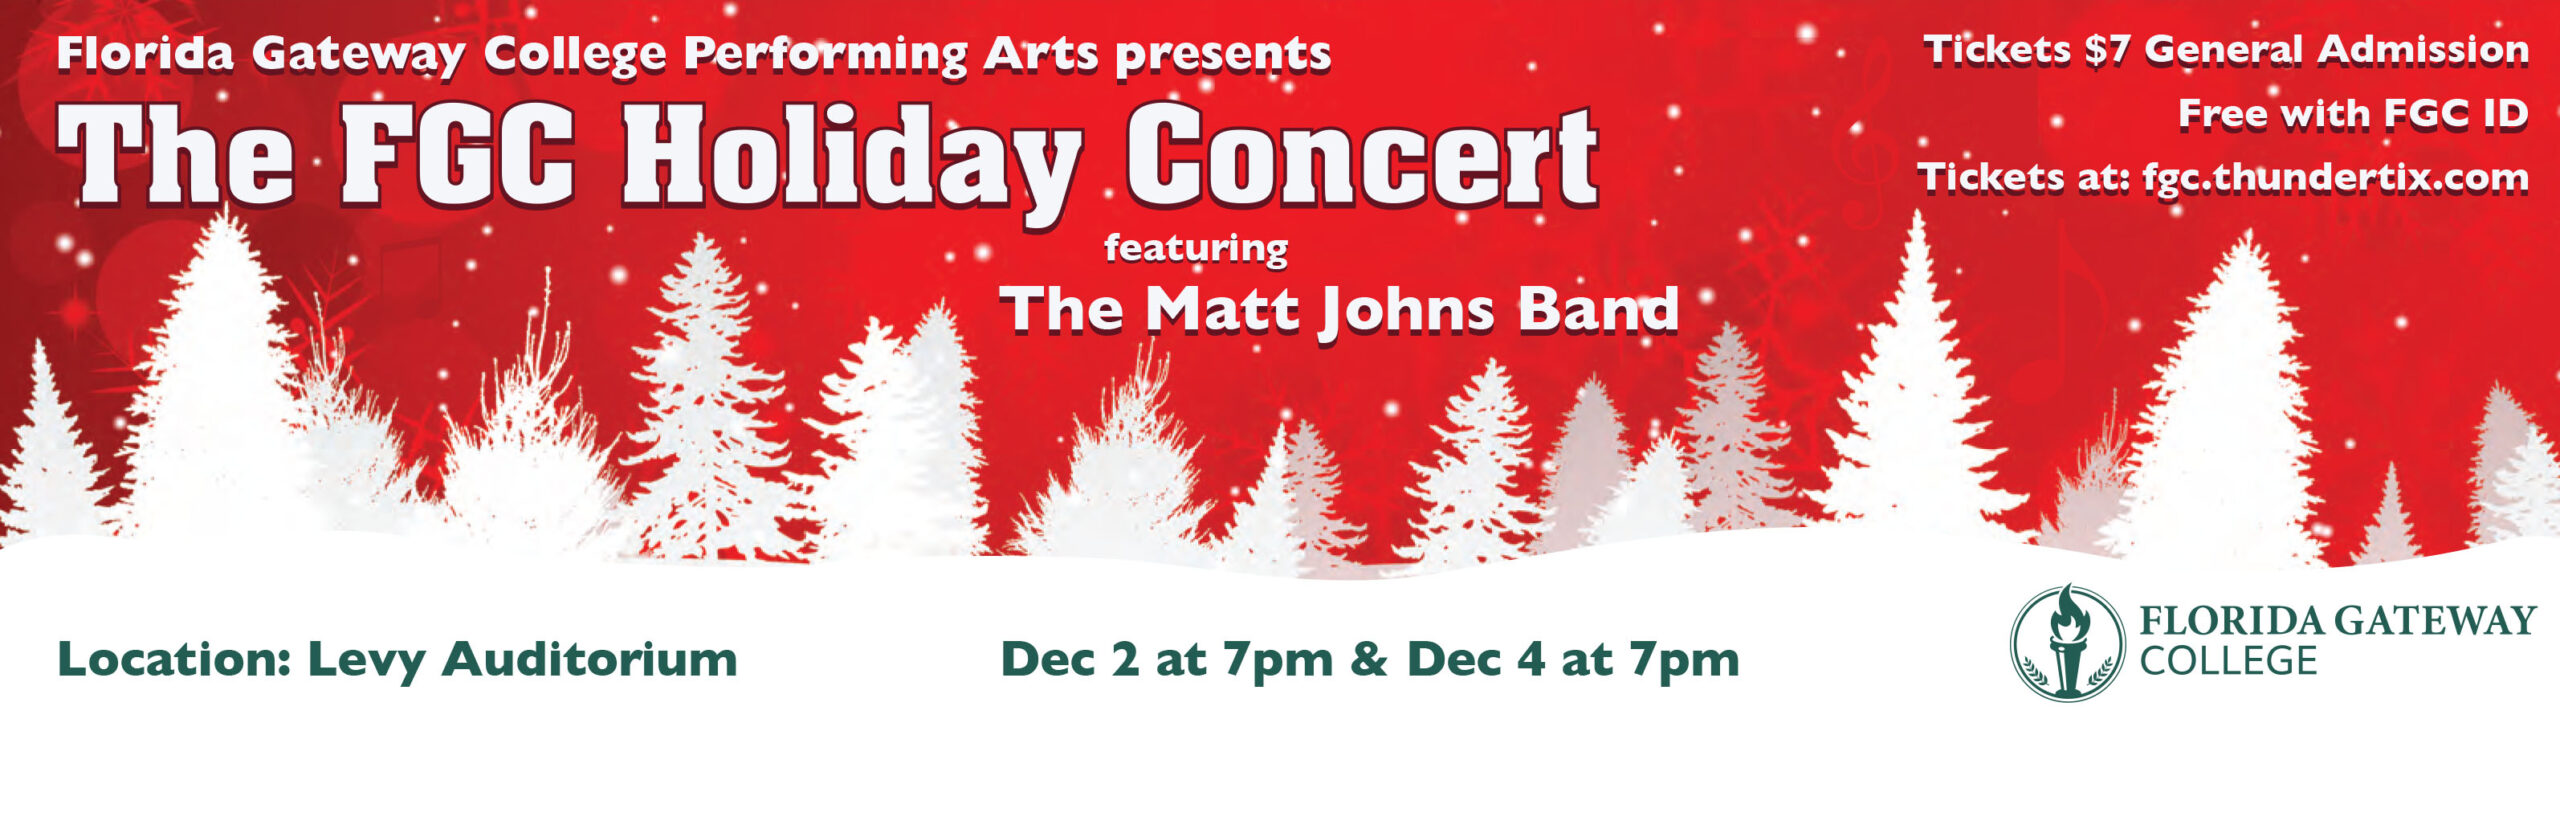 FGC Performing Arts to present Holiday Concert